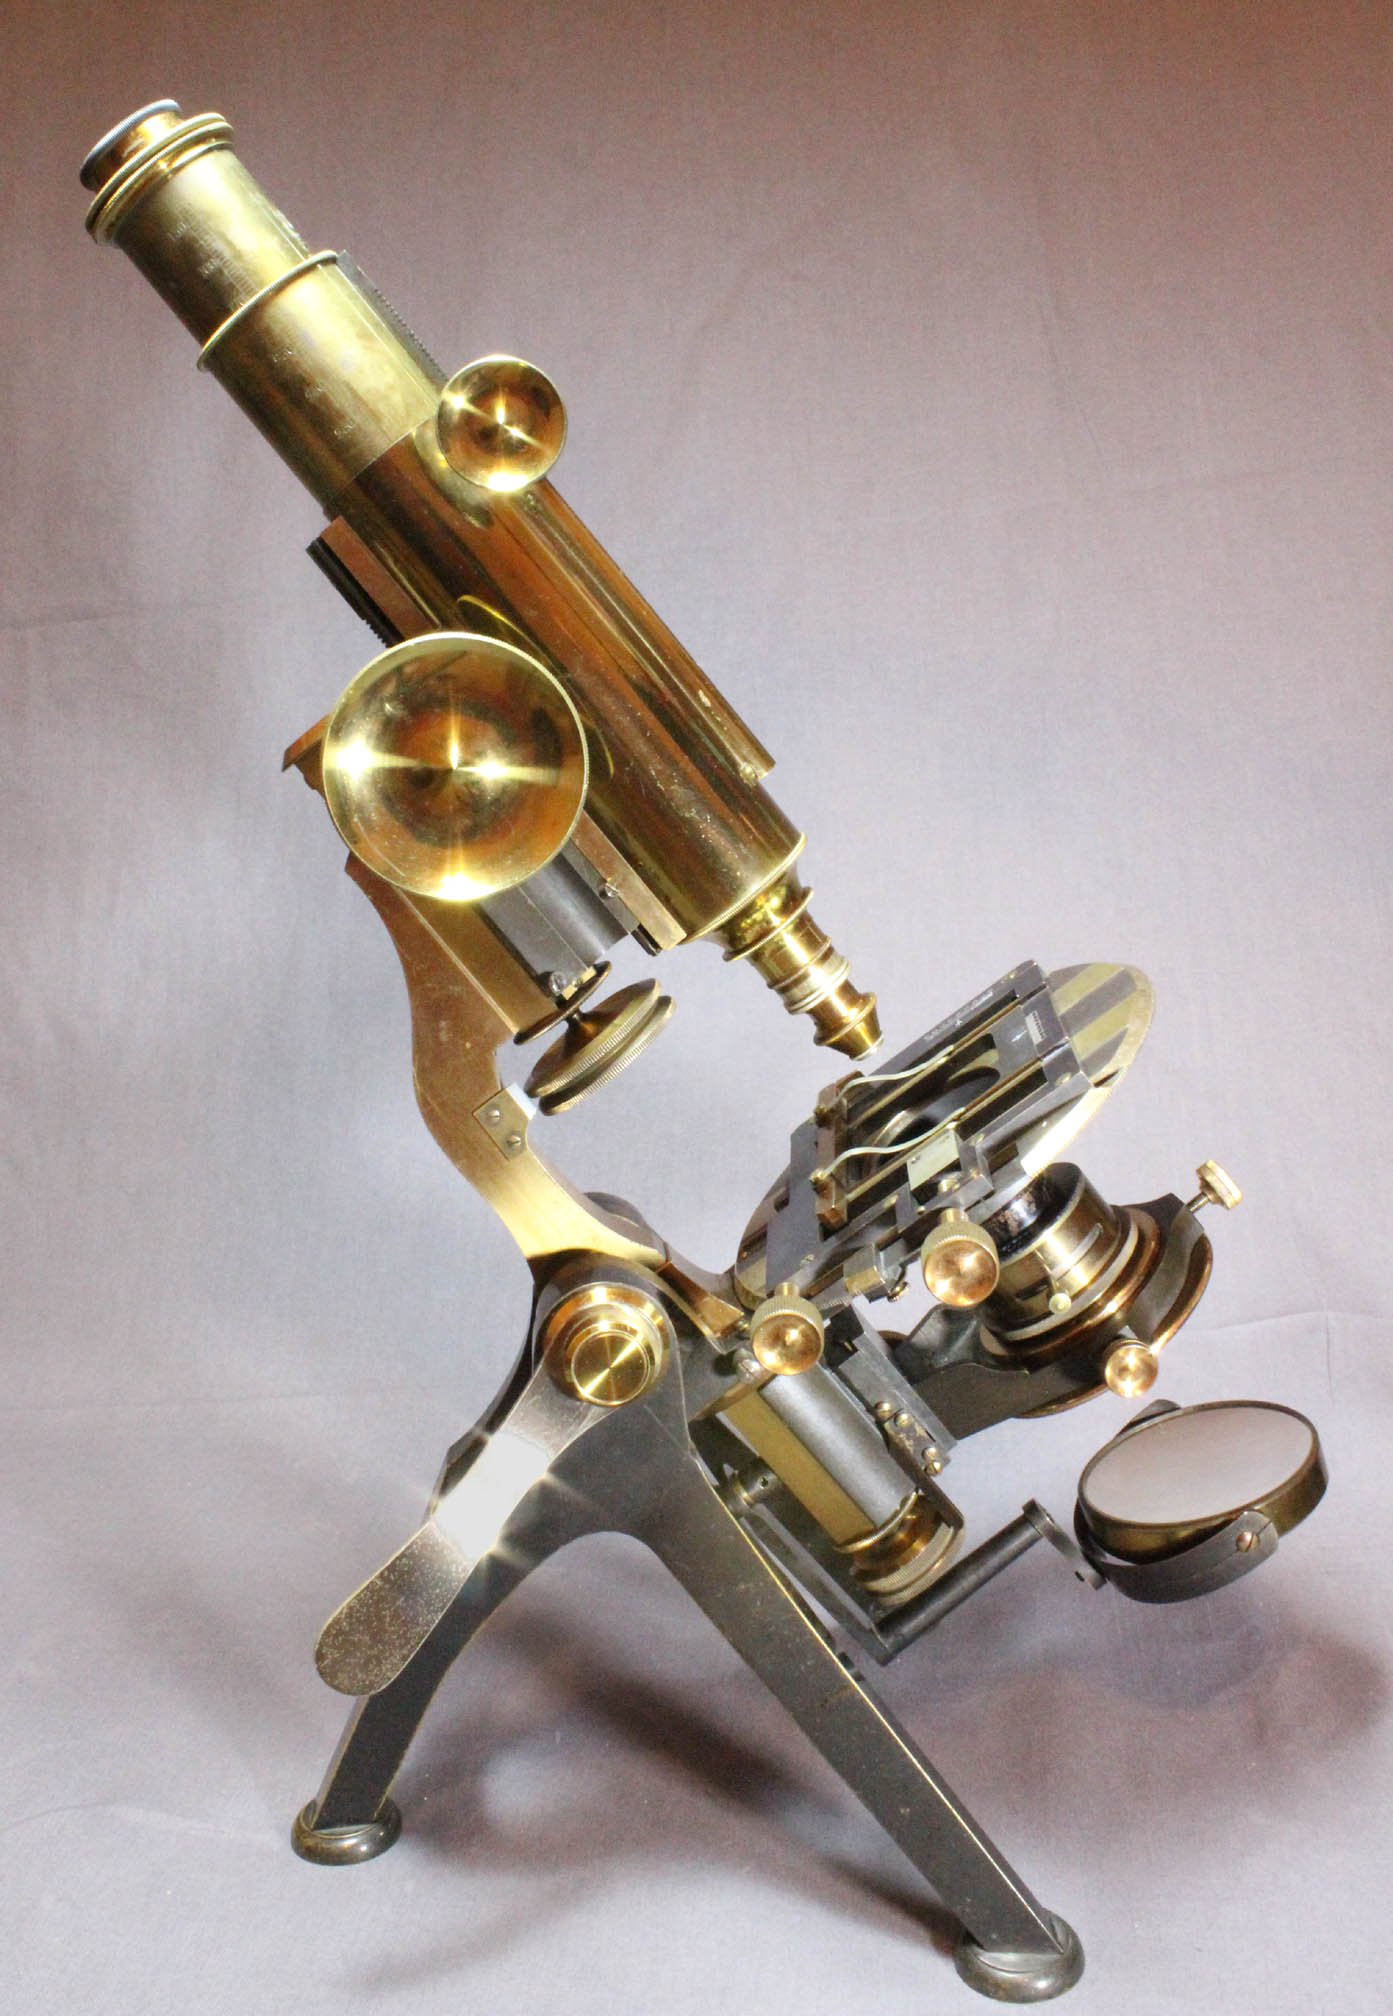 Nelson-Curties Microscope right side